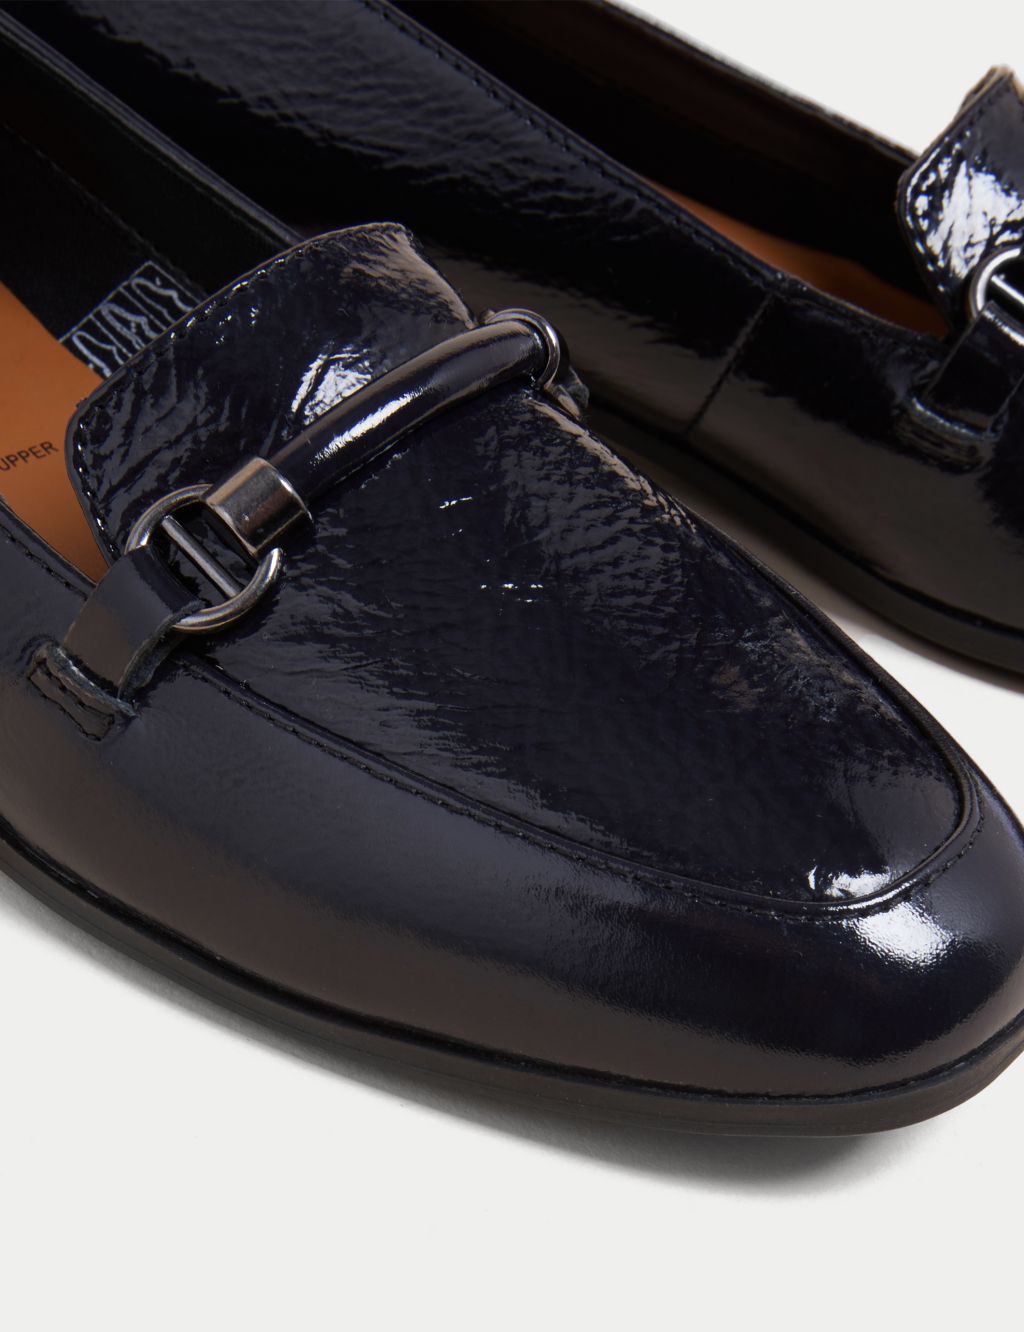 Leather Flat Loafers image 4